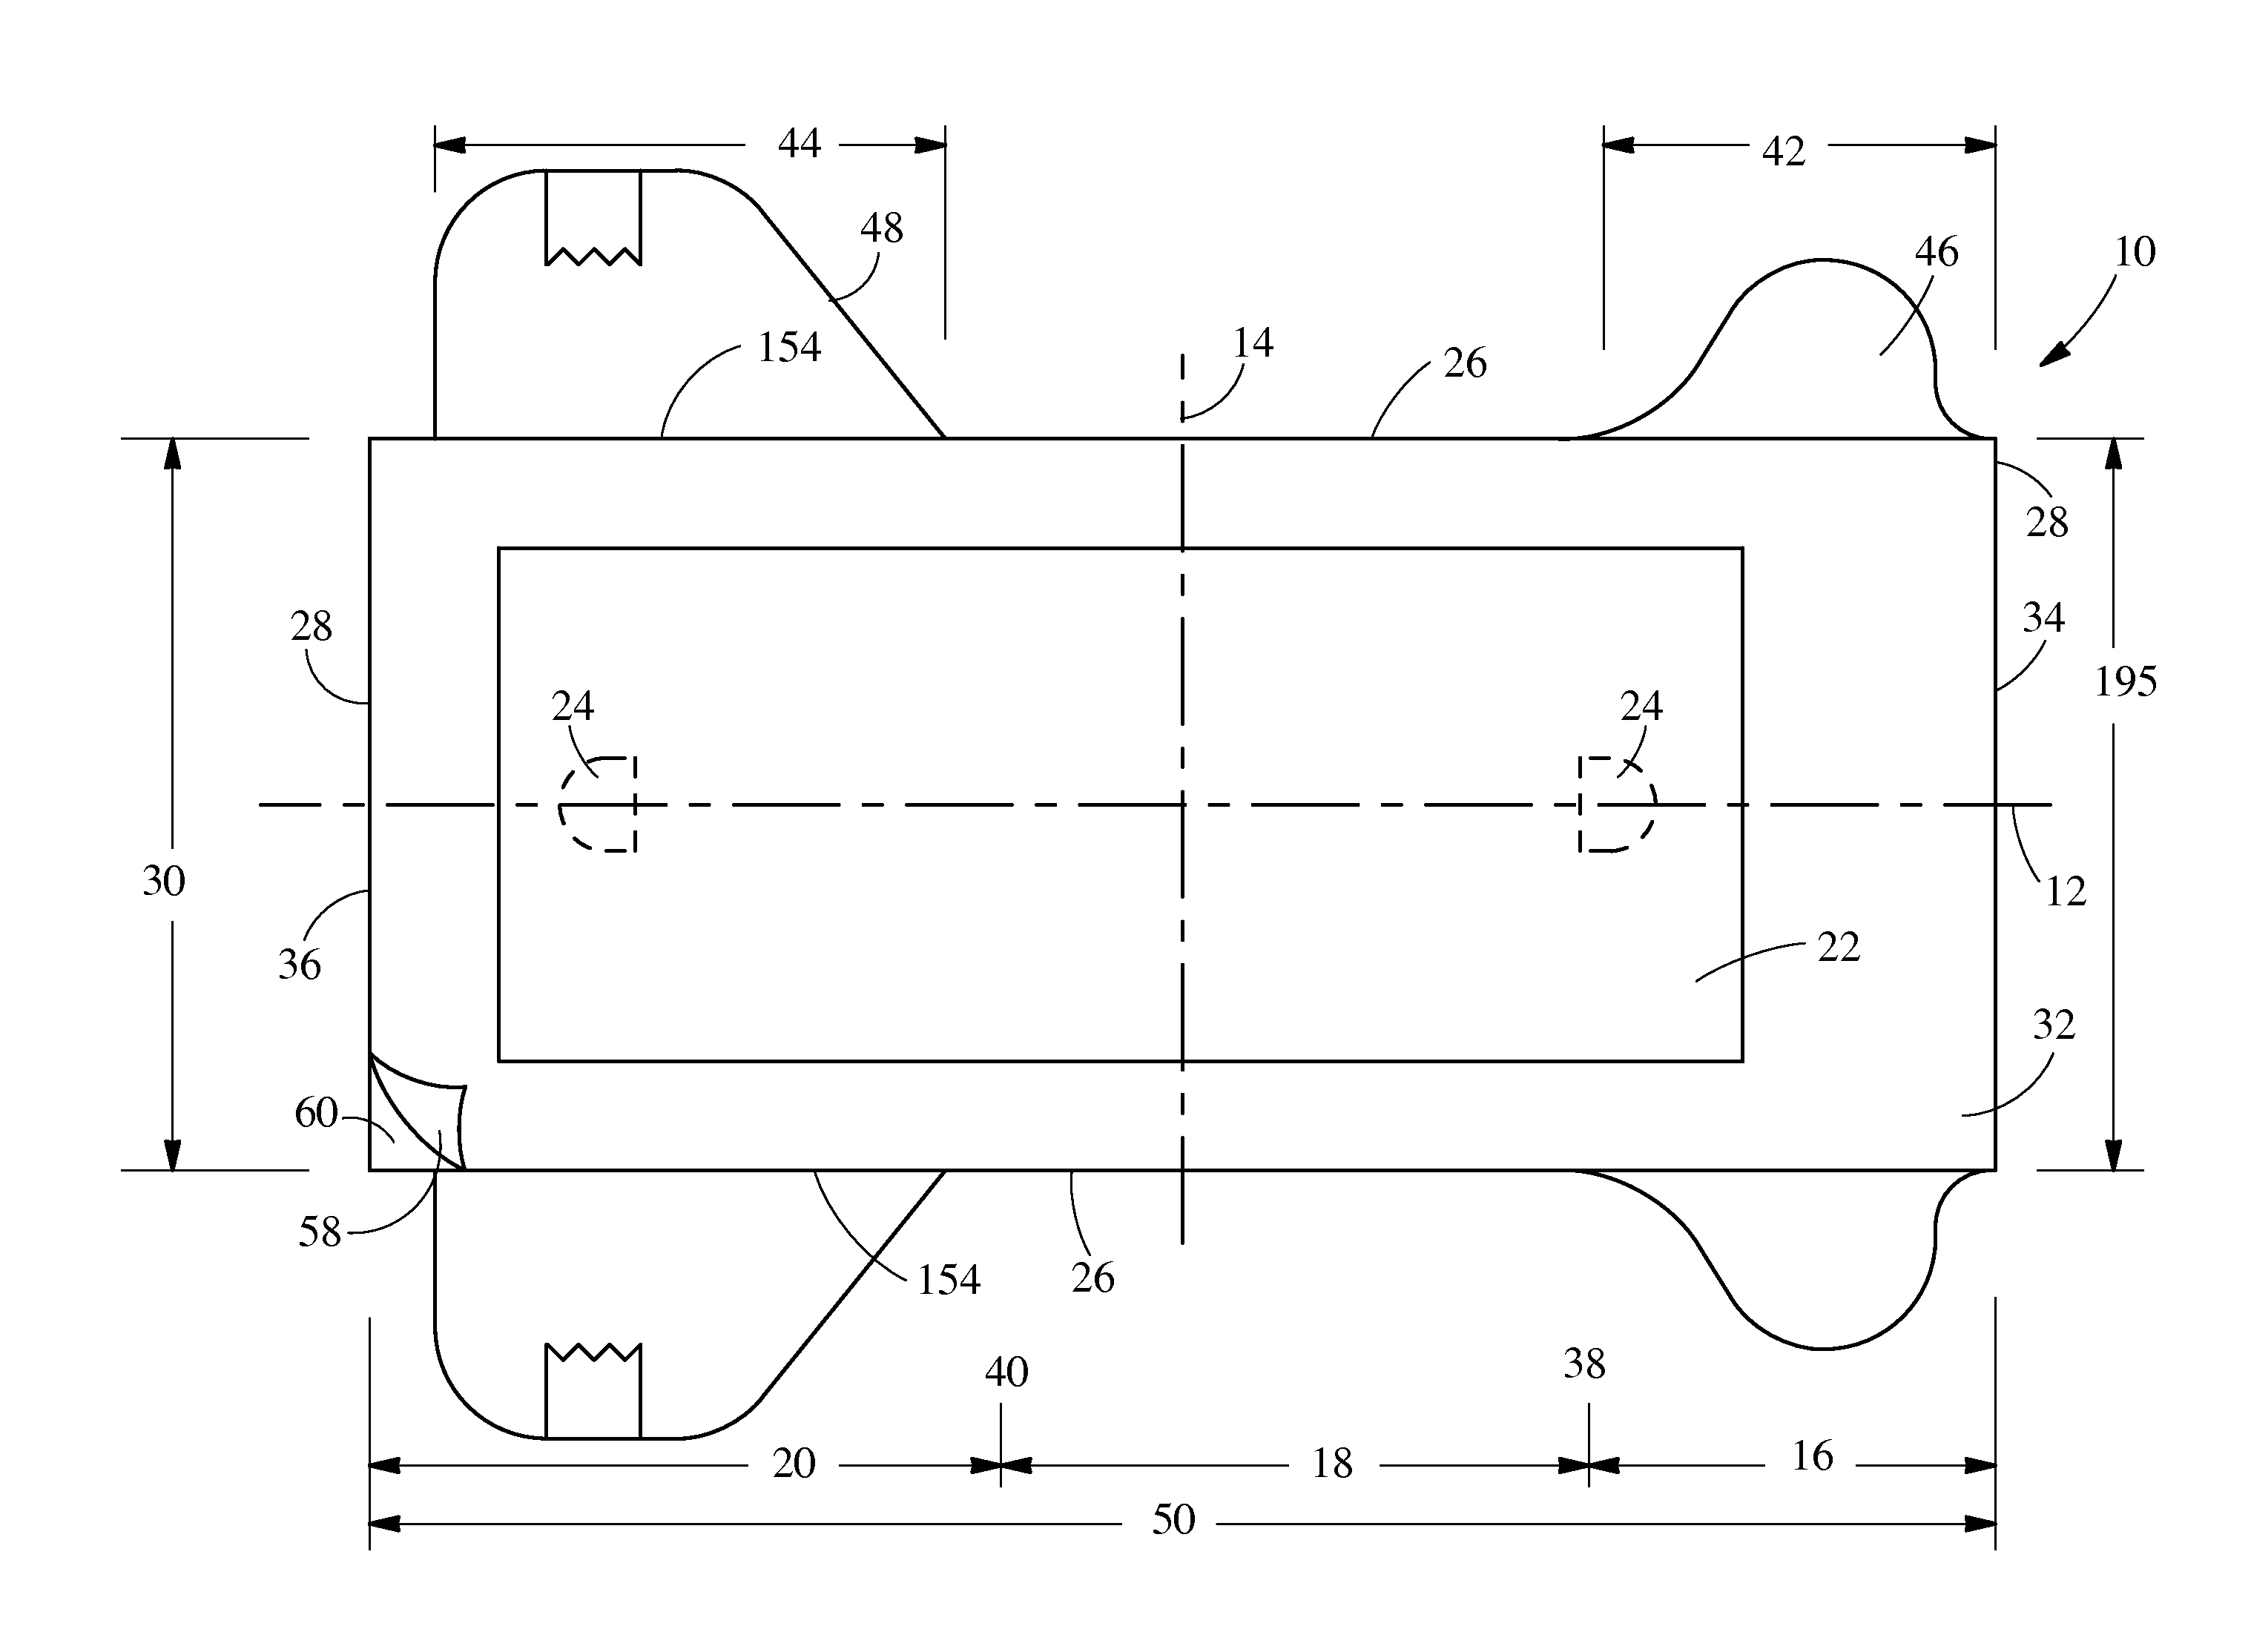 Reusable Outer Cover For An Absorbent Article Having Zones Of Varying Properties